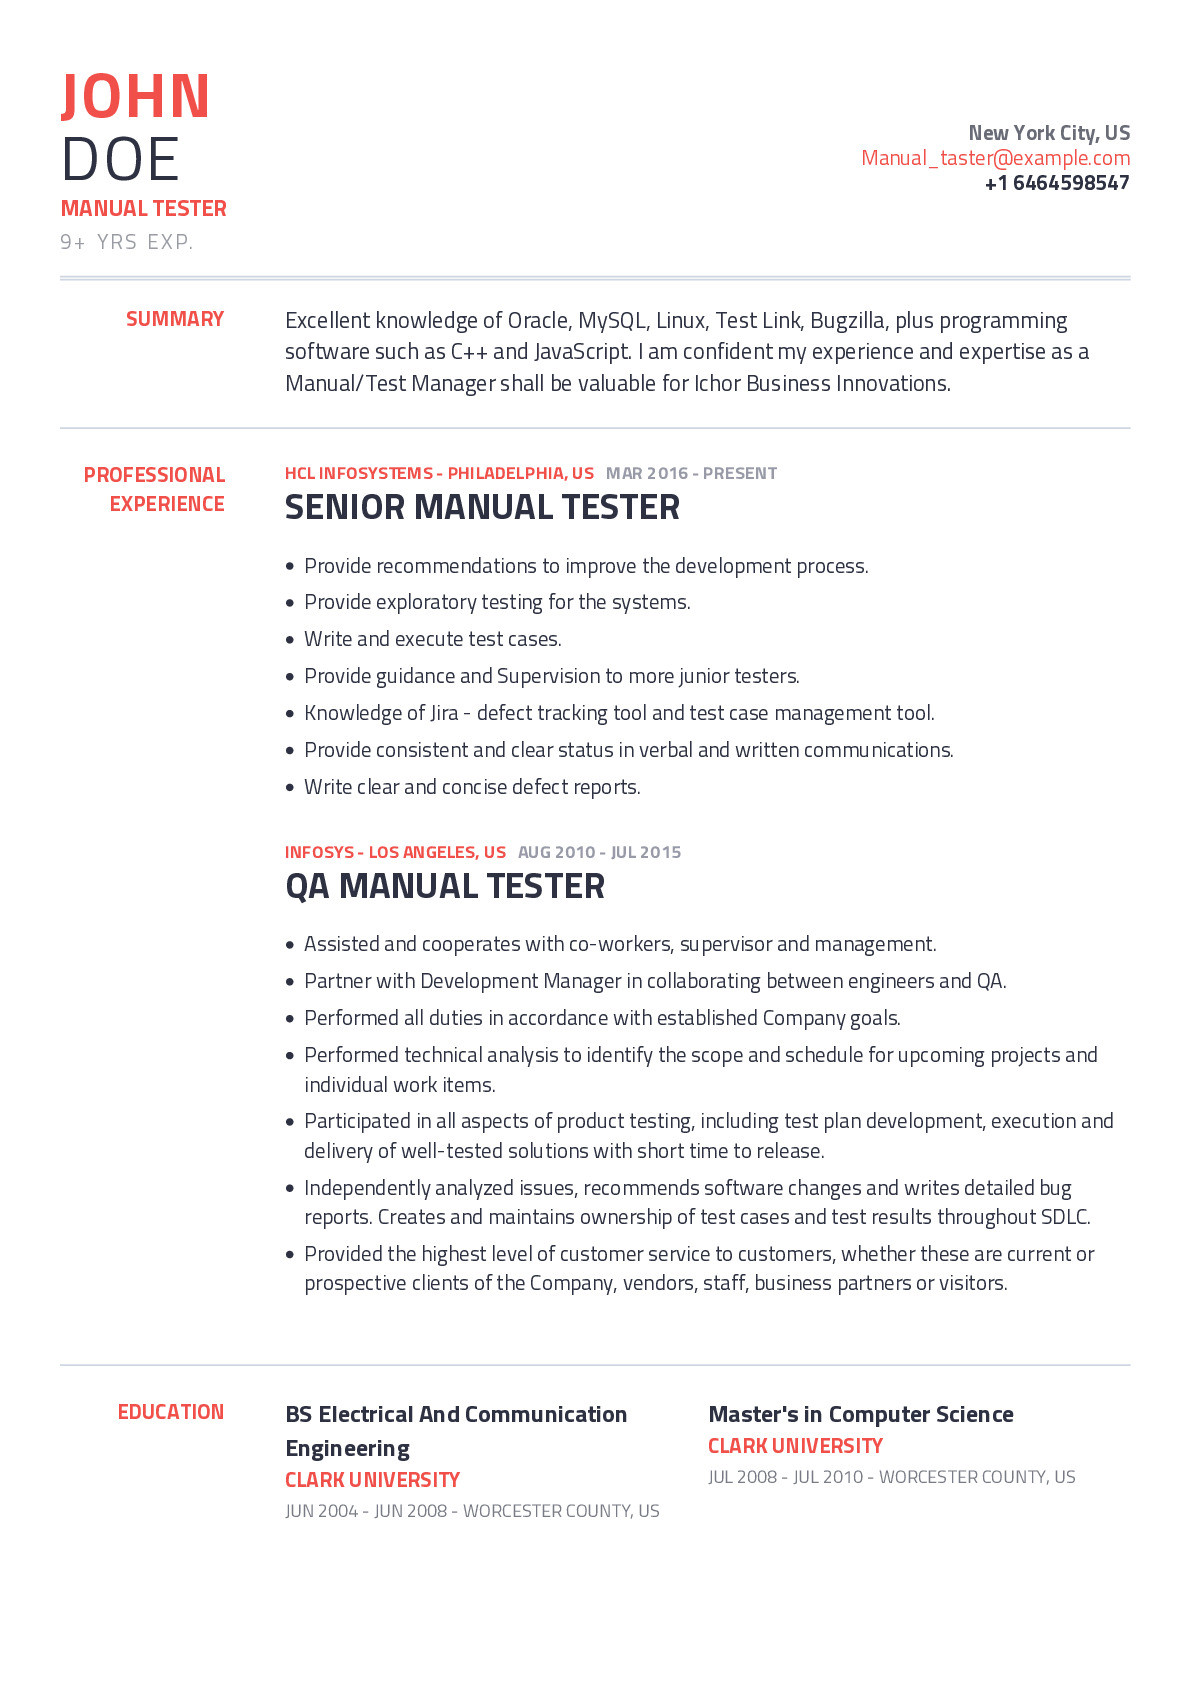 Sample Resume for Qa Manual Tester Manual Tester Resume Example with Content Sample Craftmycv